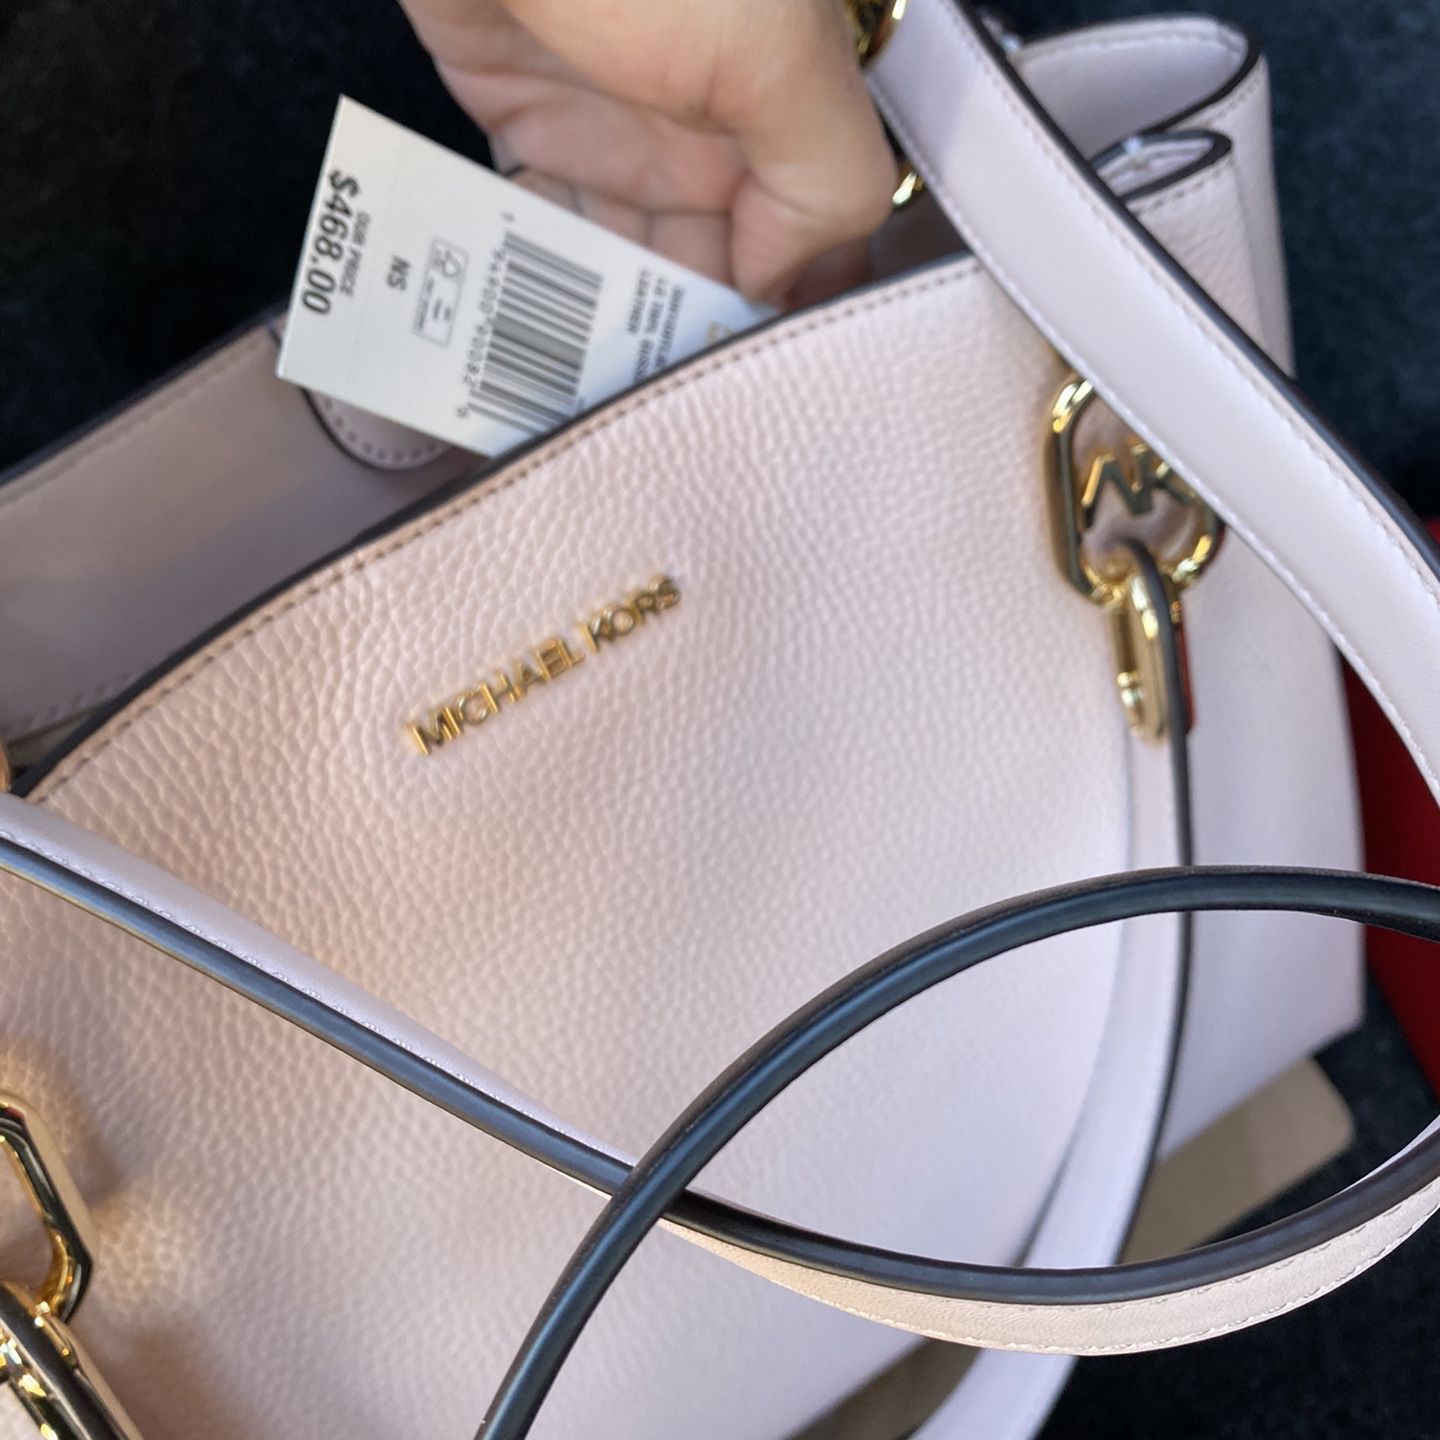 Michael Kors Purses And Wallets for Sale in Grand Prairie, TX - OfferUp